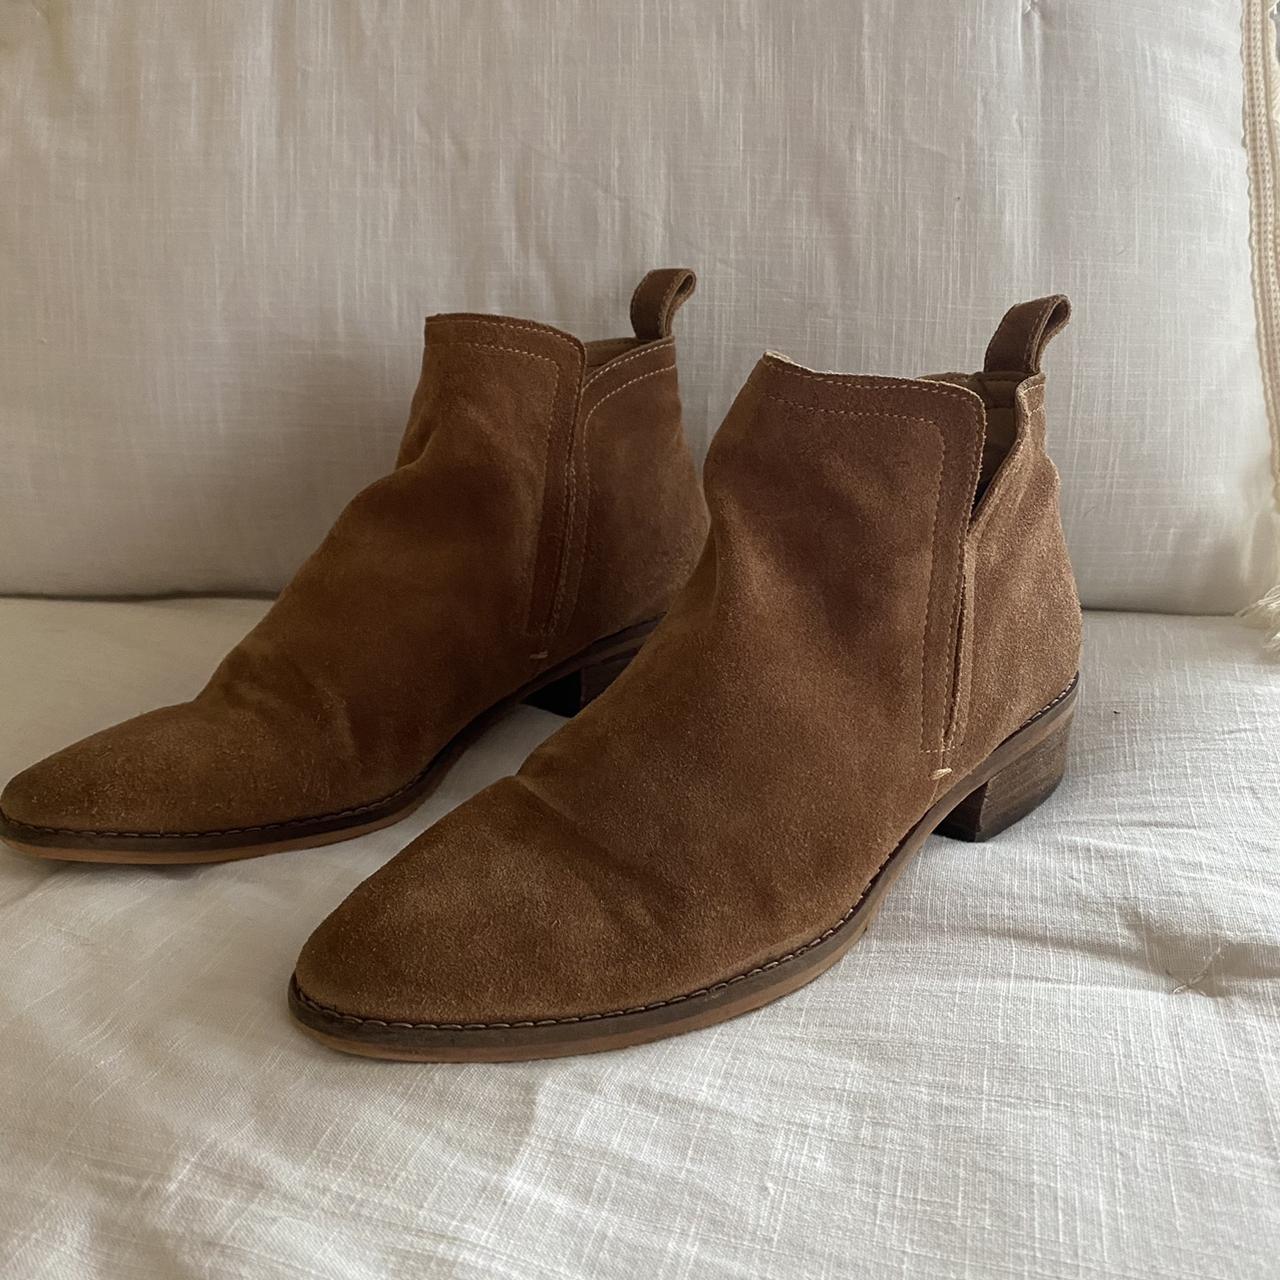 Dolce Vita Women's Tan and Brown Boots (2)